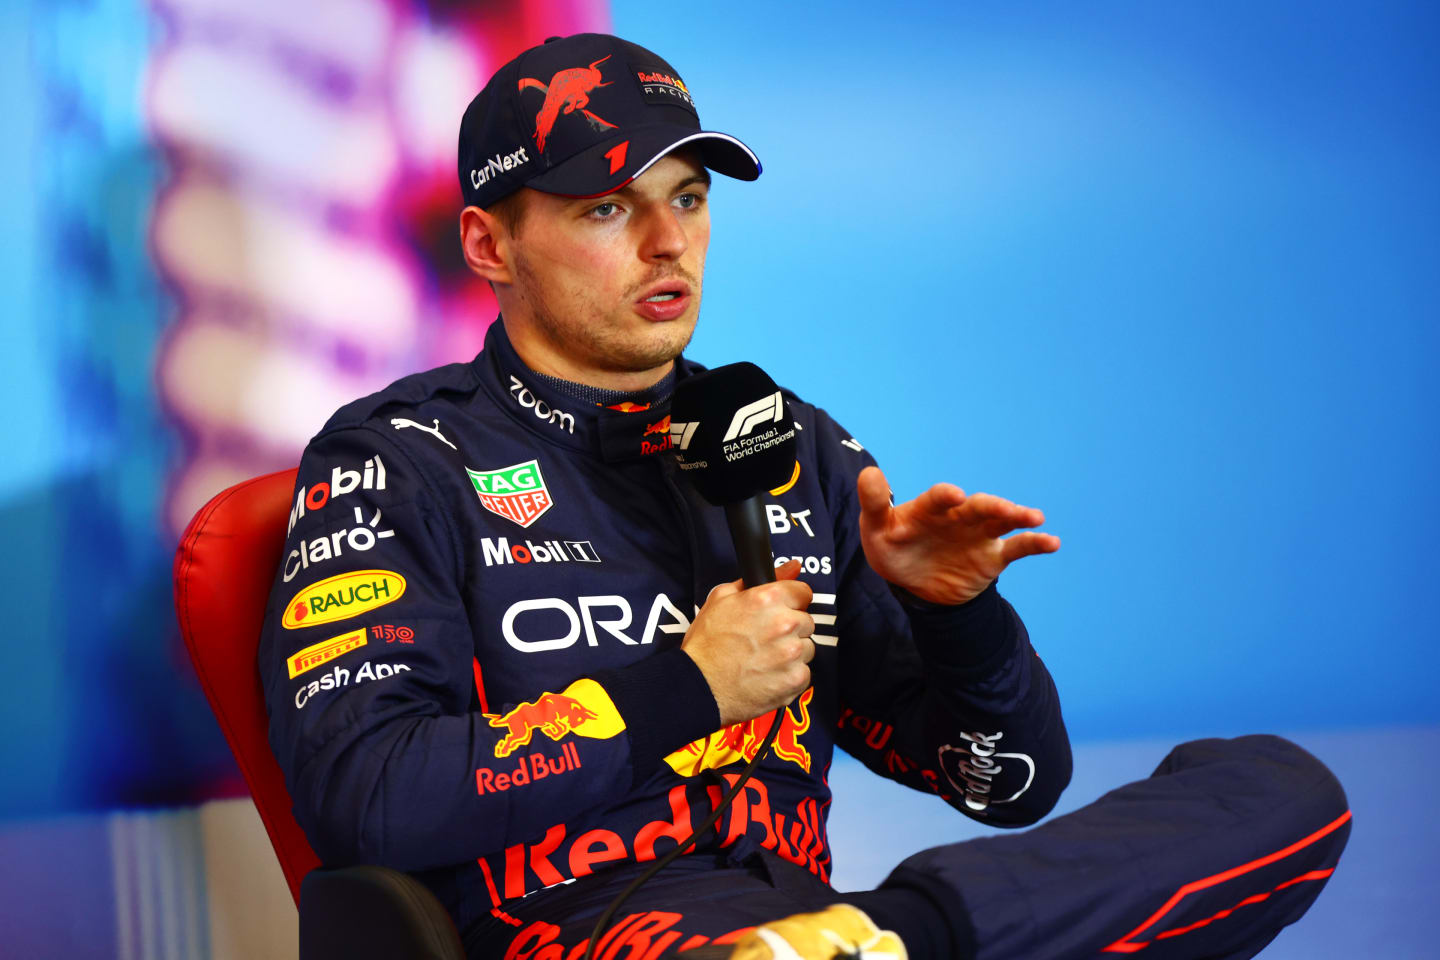 AUSTIN, TEXAS - OCTOBER 22: Third placed qualifier Max Verstappen of the Netherlands and Oracle Red Bull Racing attends the press conference after qualifying ahead of the F1 Grand Prix of USA at Circuit of The Americas on October 22, 2022 in Austin, Texas. (Photo by Dan Istitene/Getty Images)